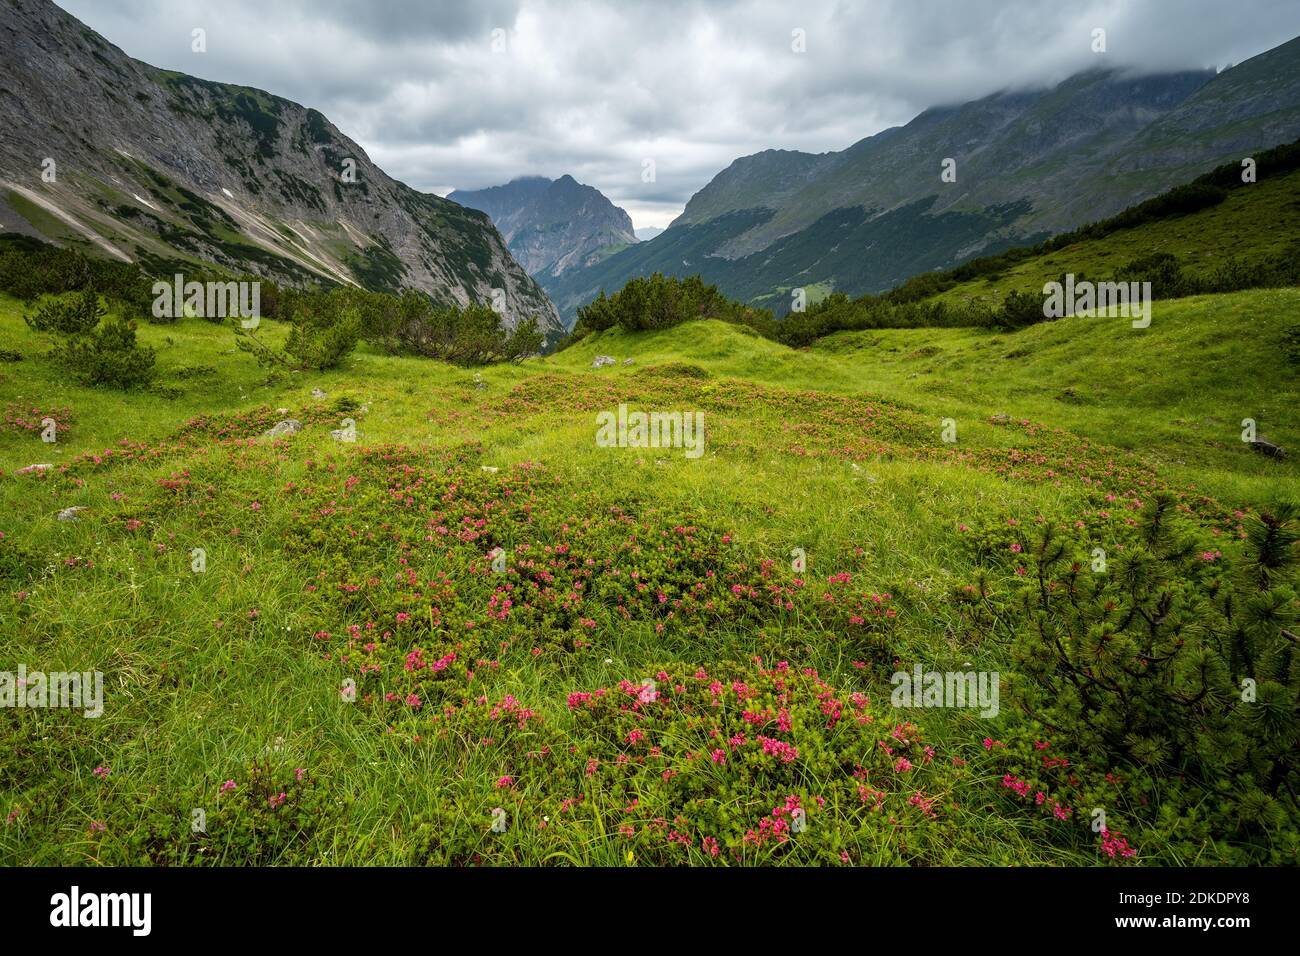 Blossom of the rust-red alpine rose, also called the rust-red alpine rose, in the hose cirque above the Karwendelhaus on a shining mountain meadow. in the background the eastern Karwendelspitze, shrouded in clouds, and the Bäralpl. Stock Photo